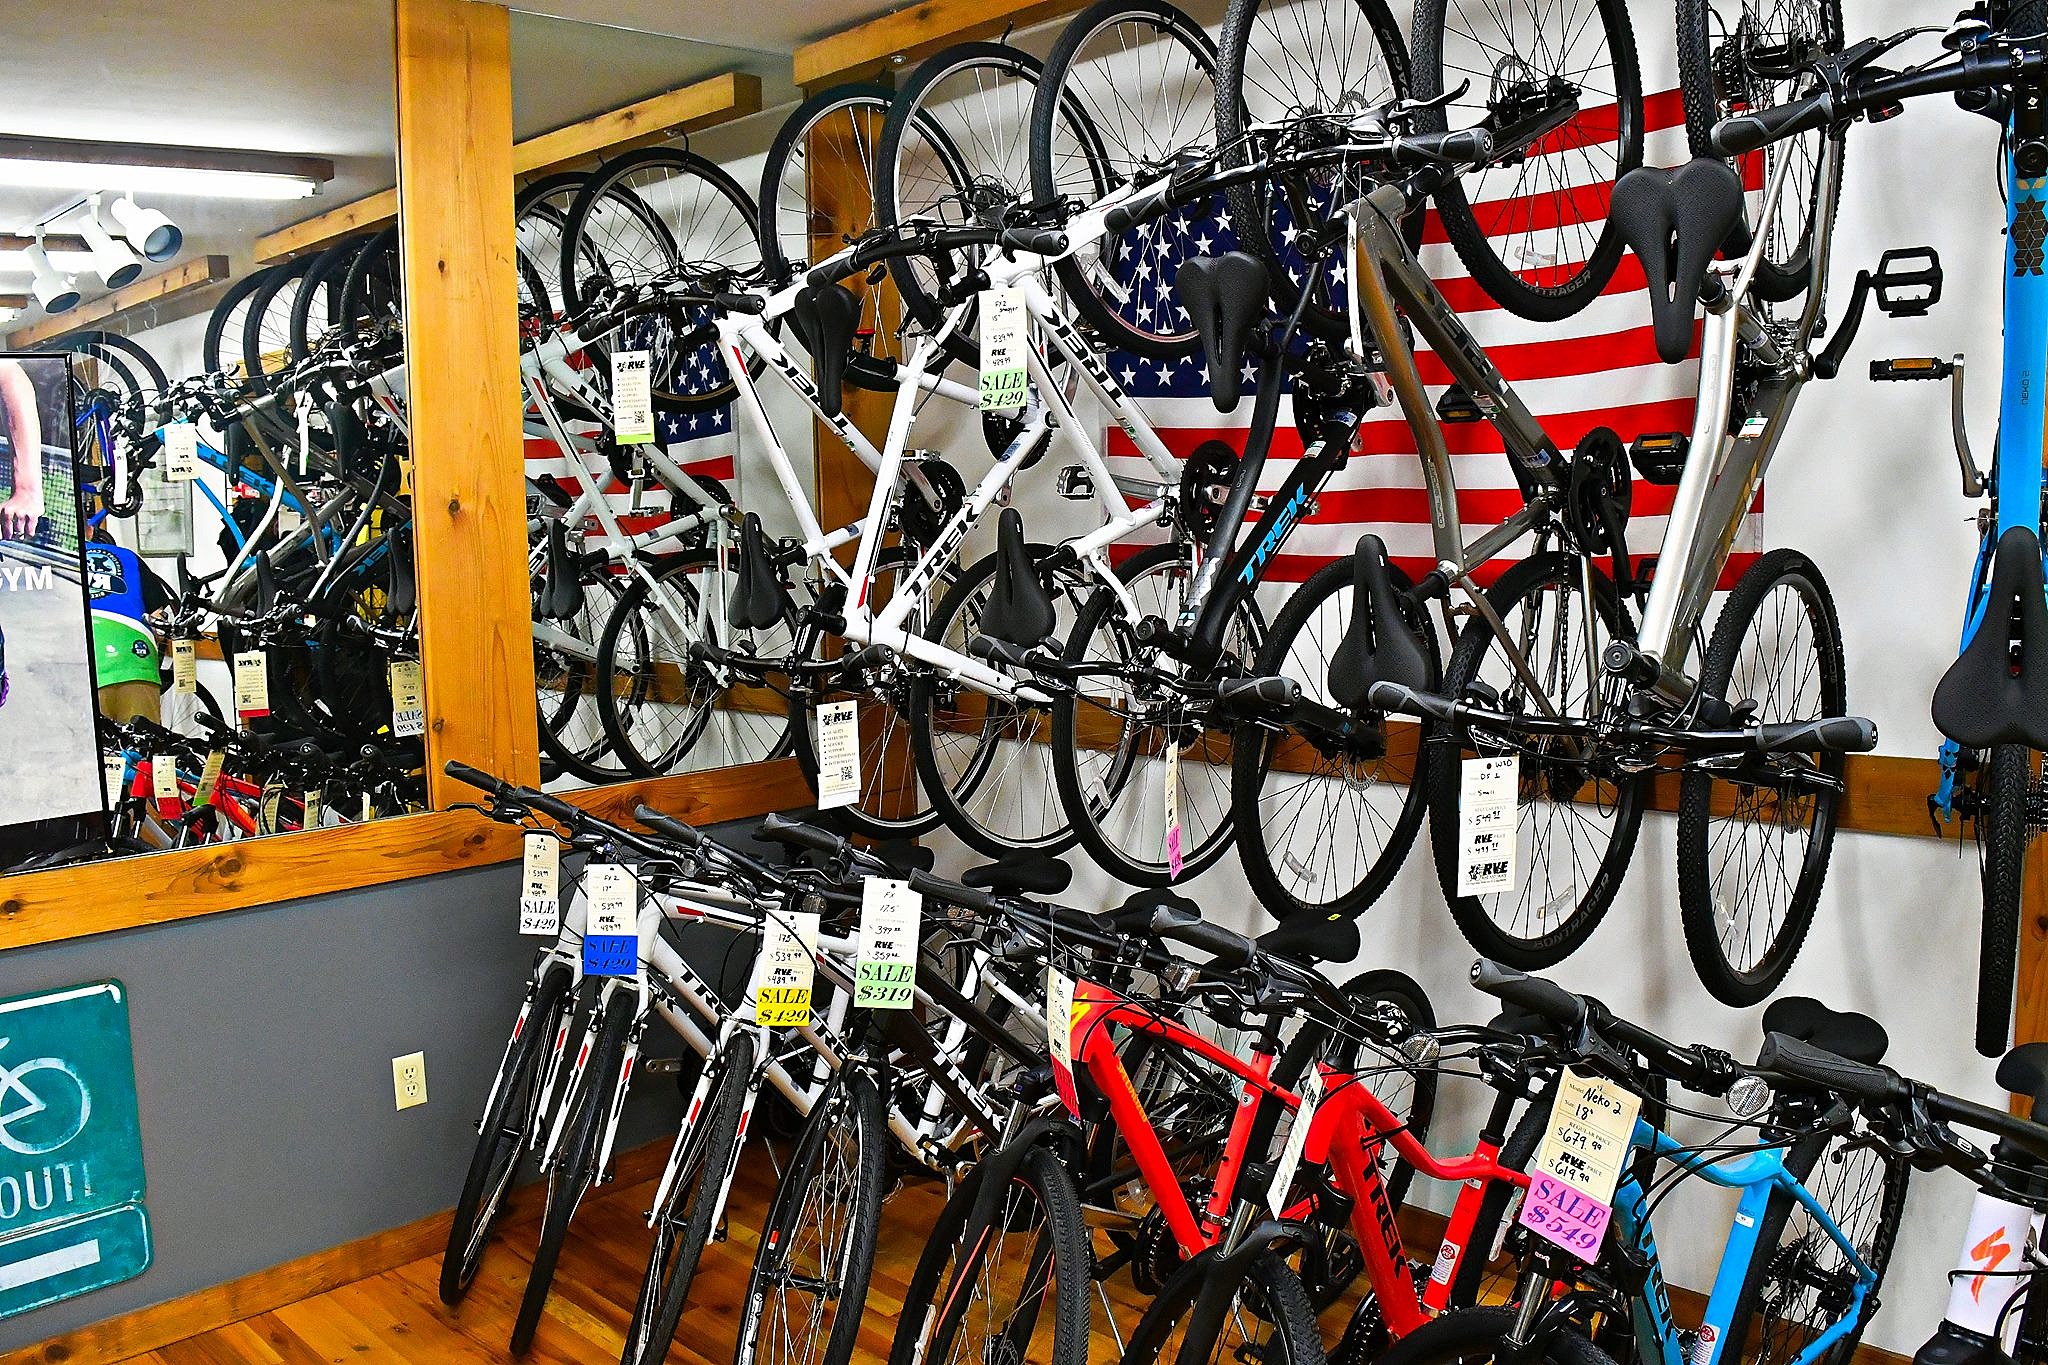 Hit The Road With These 12 Great Bike Shops in Upstate New York!